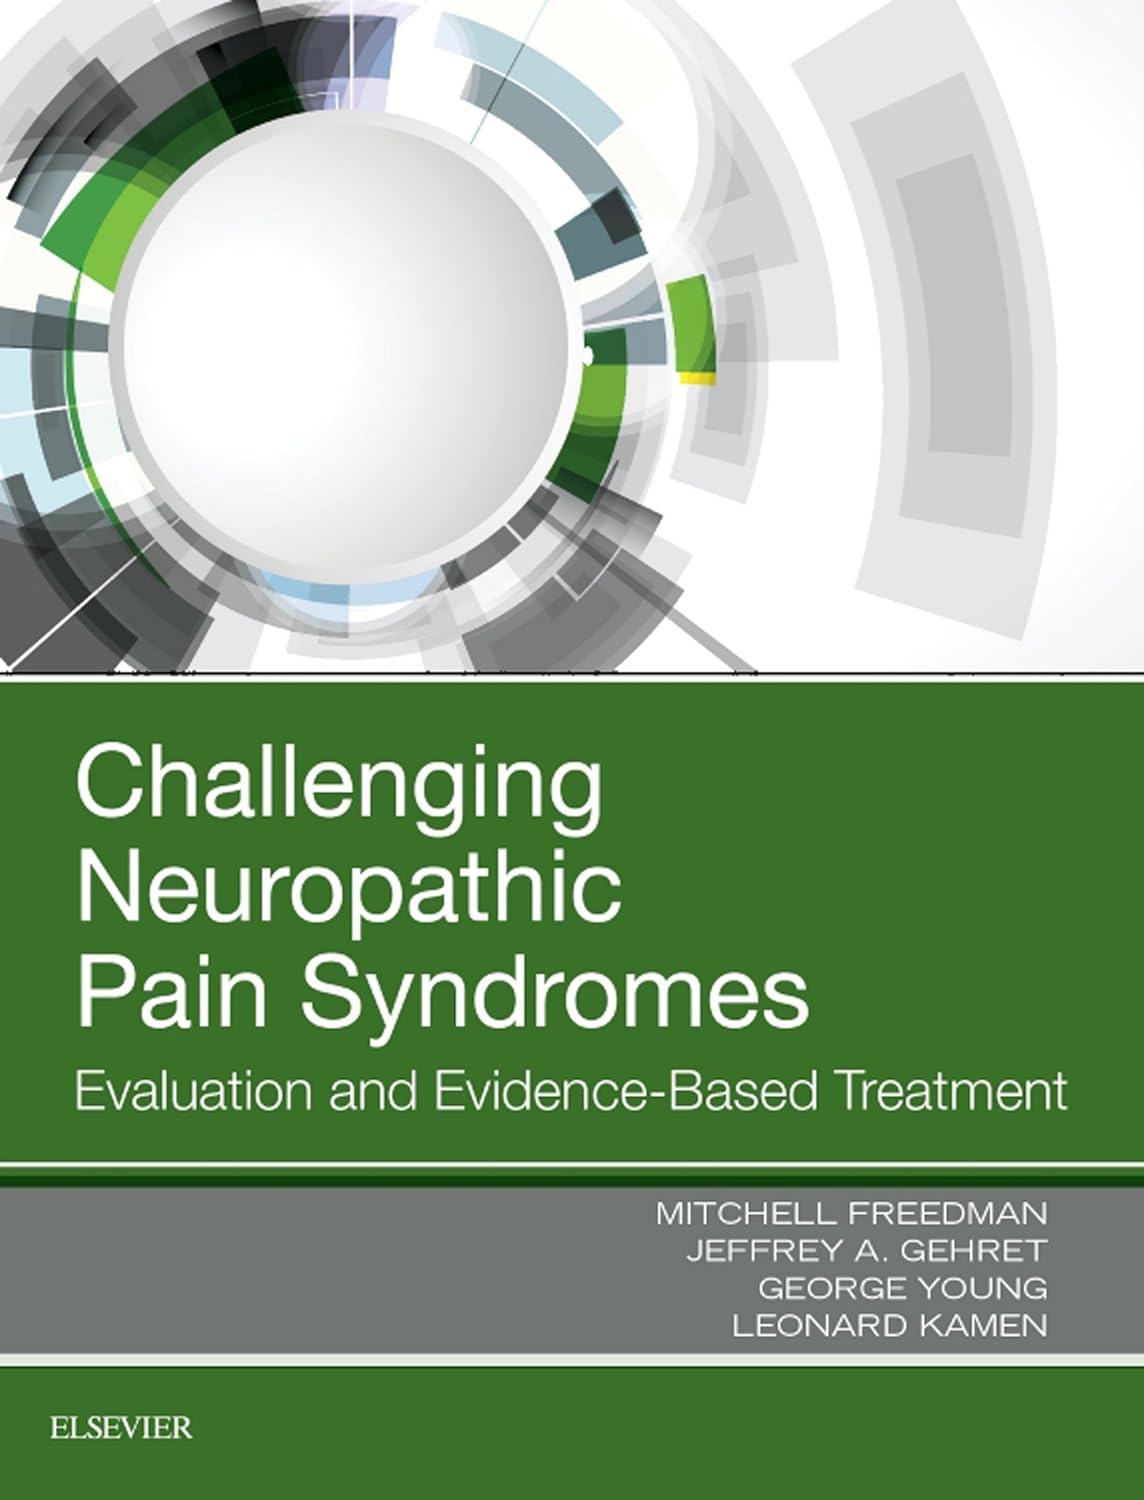 Challenging Neuropathic Pain Syndromes Evaluation and Evidence-Based Treatment 1st Edition